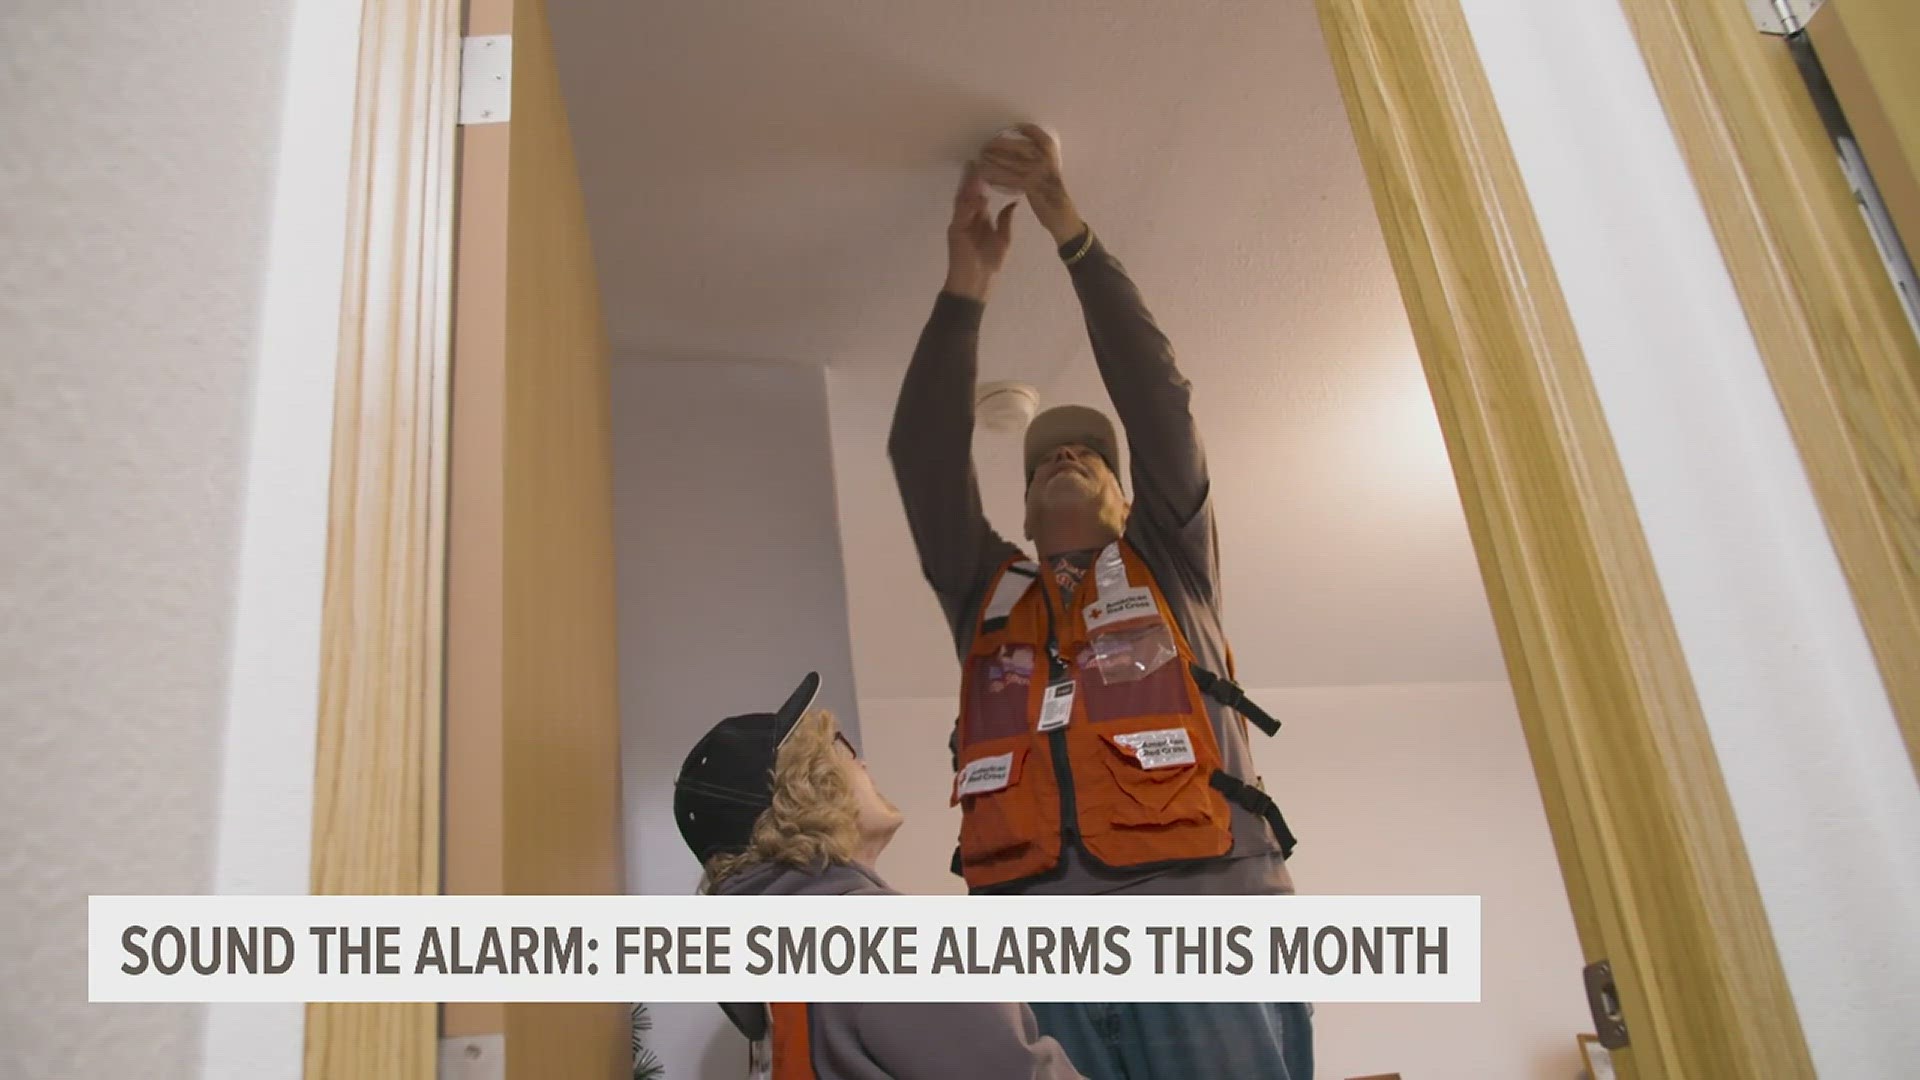 Volunteers will install the smoke detectors in late March. Here's how you can sign up to help.